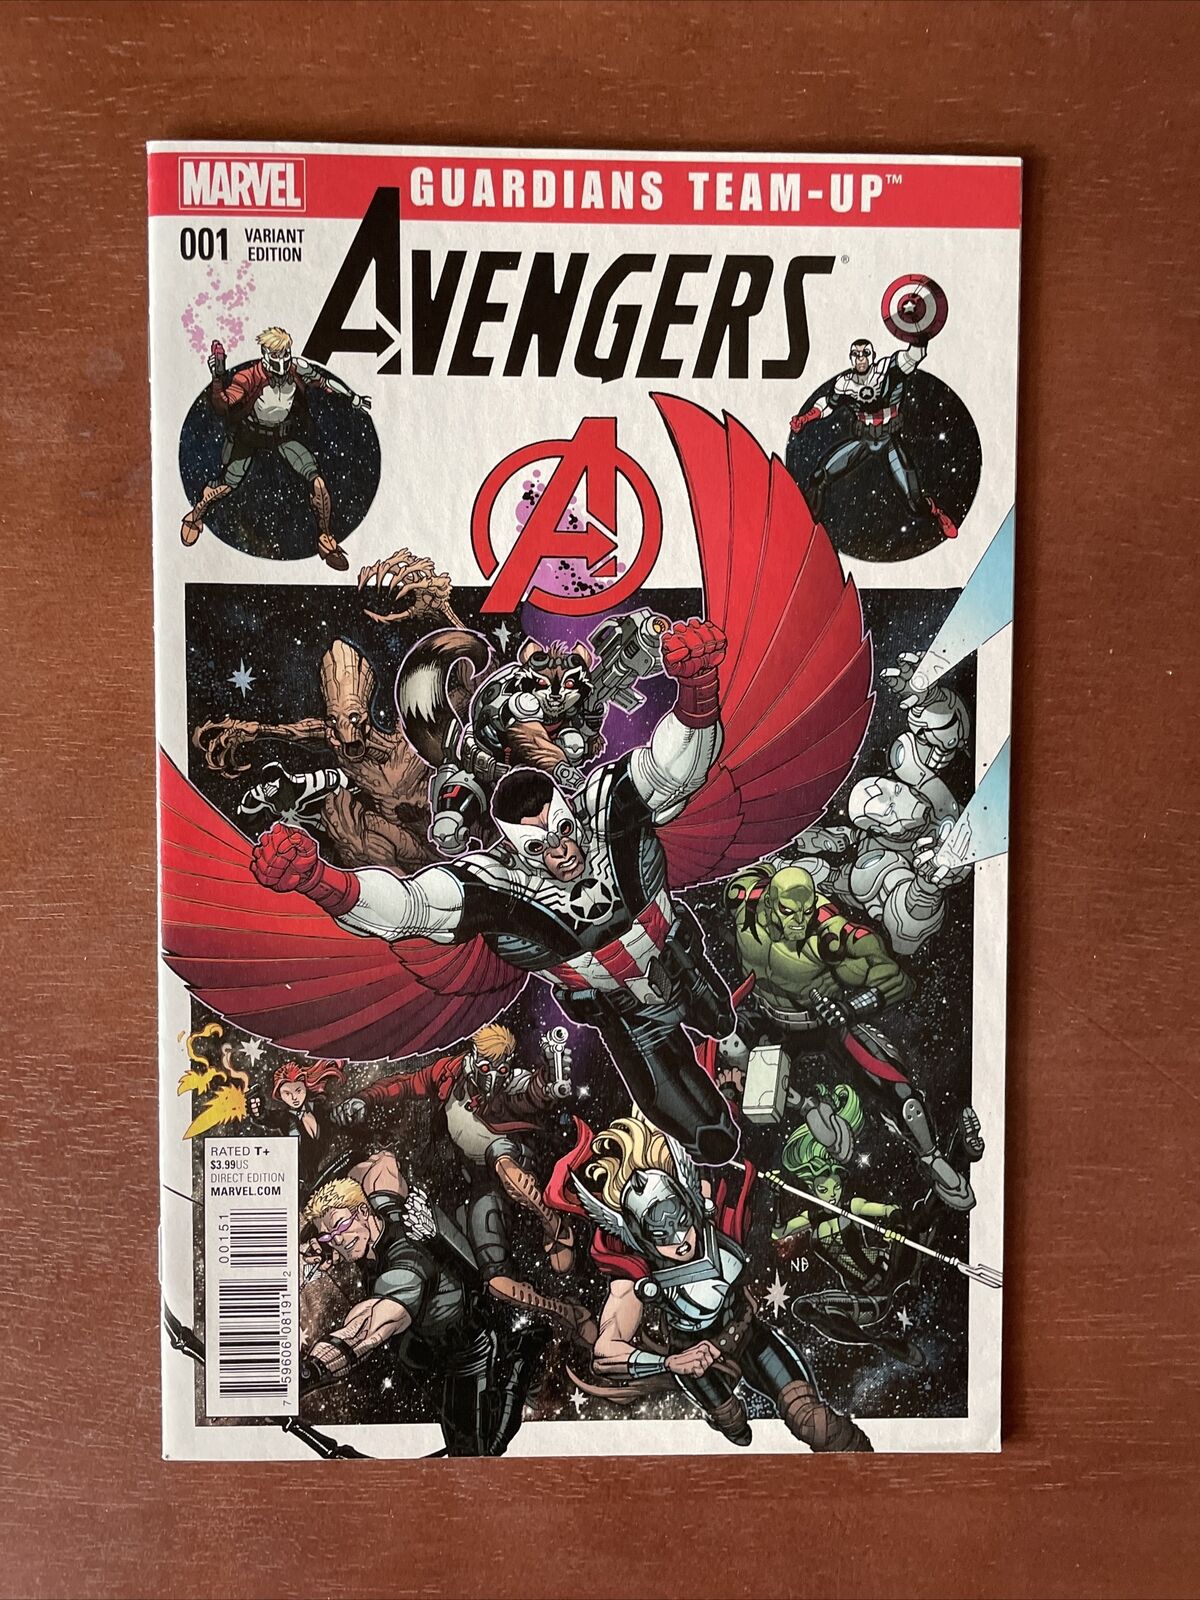 Guardians Team-Up #1 (2015) 9.4 NM Marvel Variant Edition Avengers Comic Book